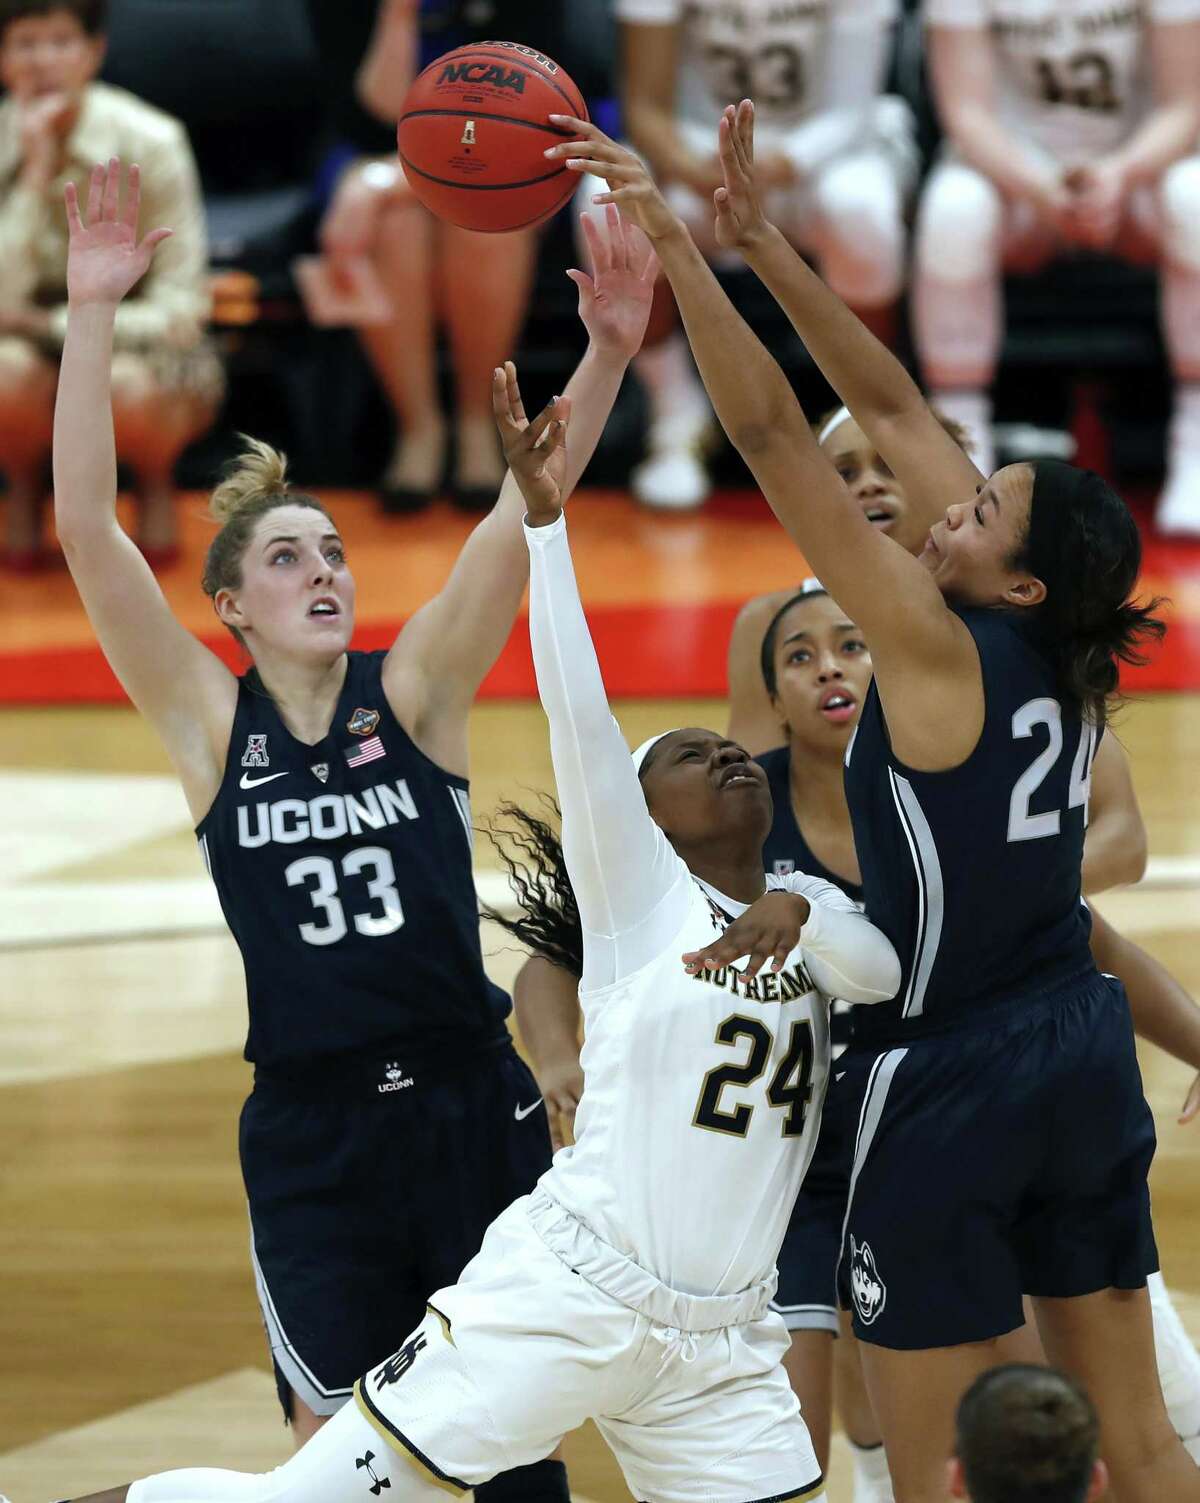 Notre Dame guard Arike Ogunbowale (24) has her shot block as UConn guard Katie Lou Samuelson (33) and forward Napheesa Collier defend during a Final Four semifinal of the NCAA women’s college basketball tournament on Friday in Tampa, Fla. Both Samuelson and Collier will be leaving for the WNBA at the end of the school year.